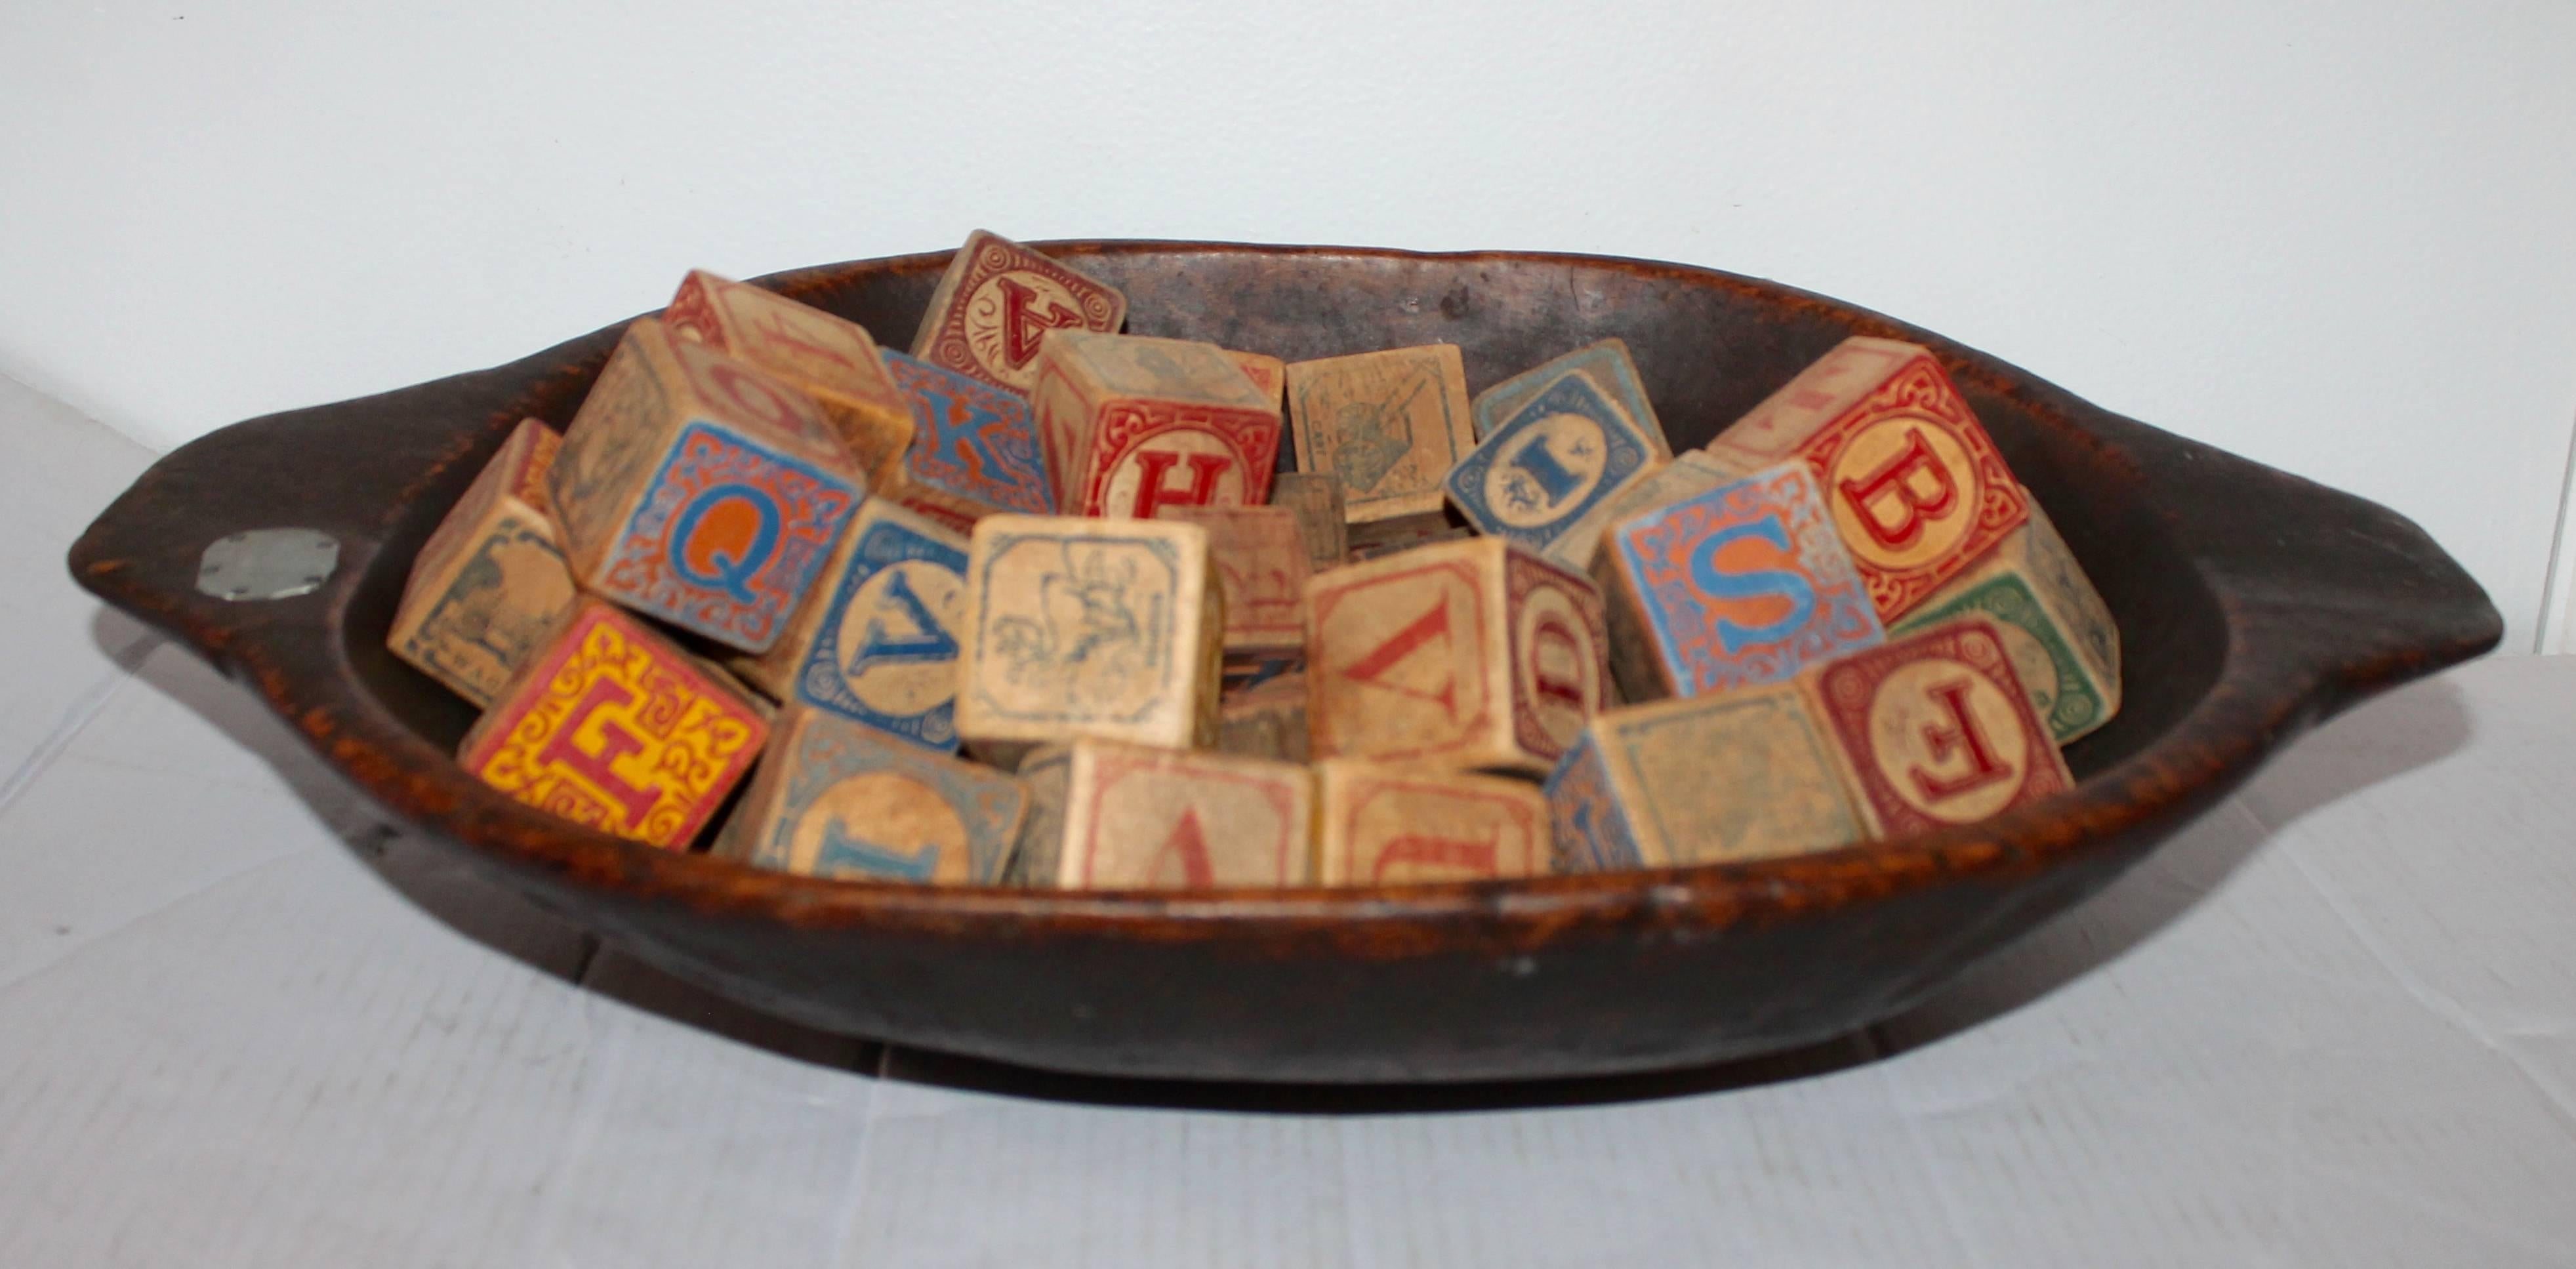 This amazing collection of hand-painted and carved children blocks are in good as found condition. The larger cubes are 2 inches squares and the other
smaller cubes are 1 inches squares. There are over 100 blocks in all. Great in a basket or small